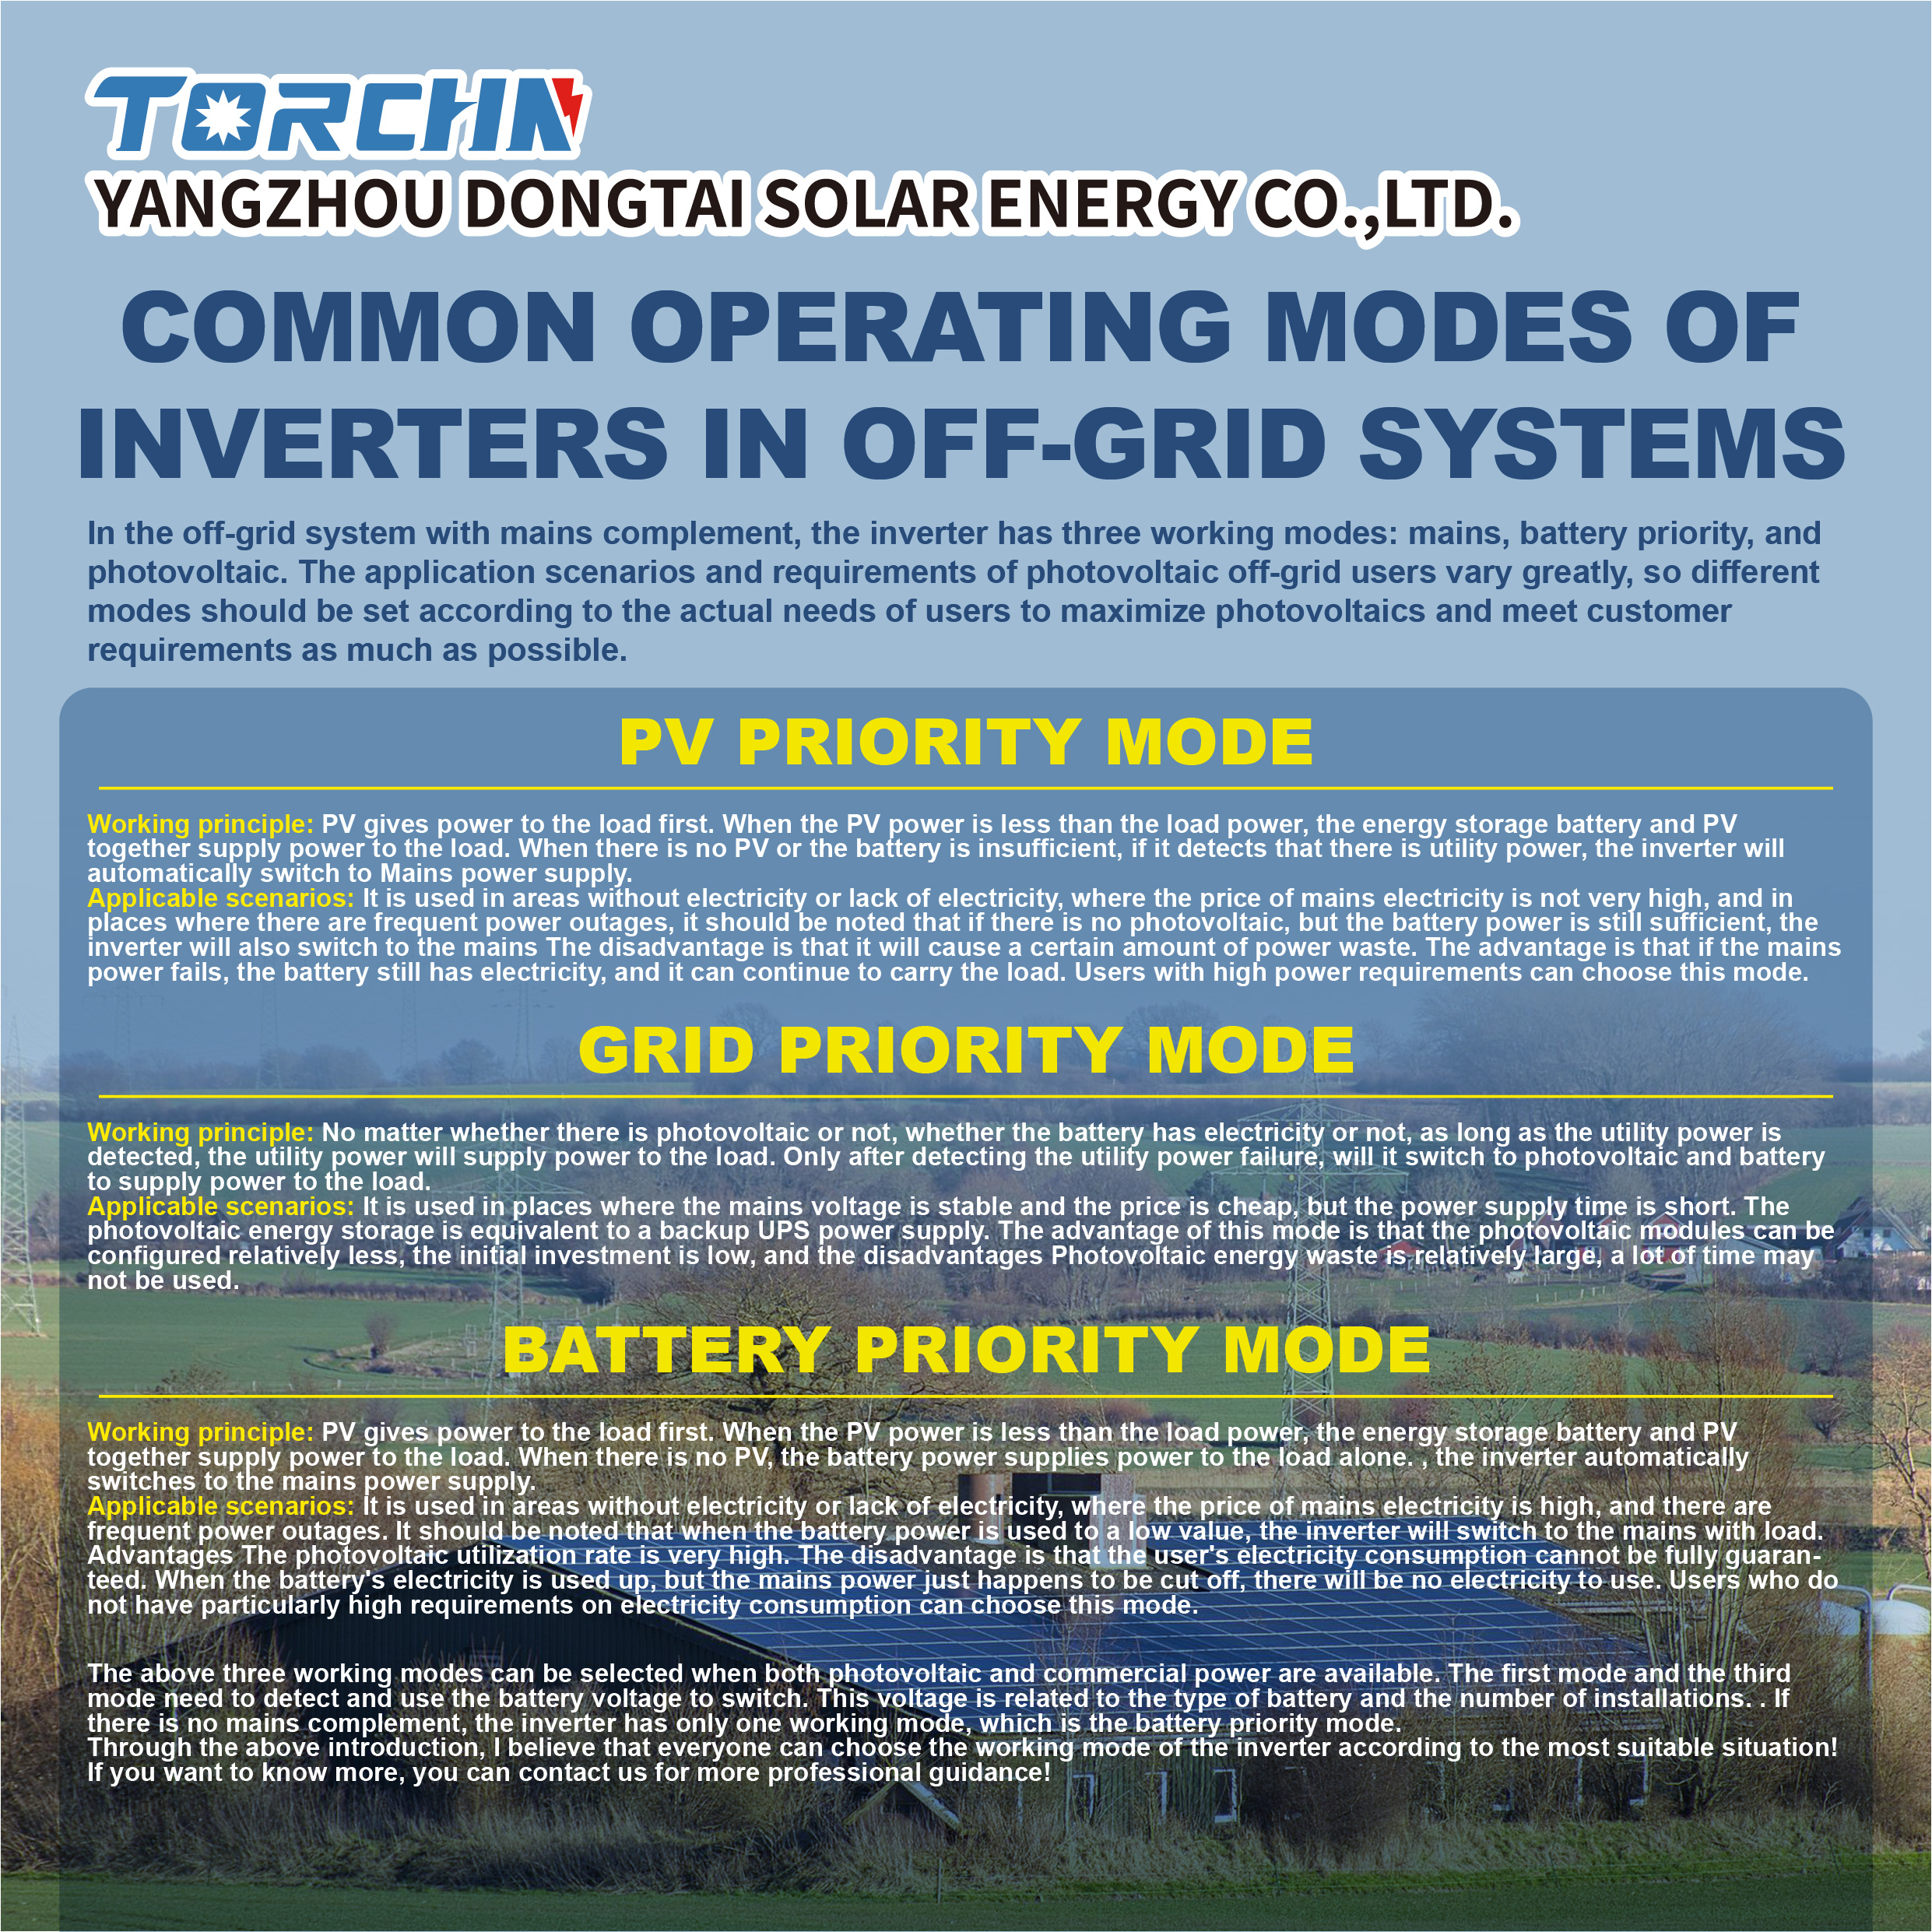 Common operating modes of inverters in off-grid systems